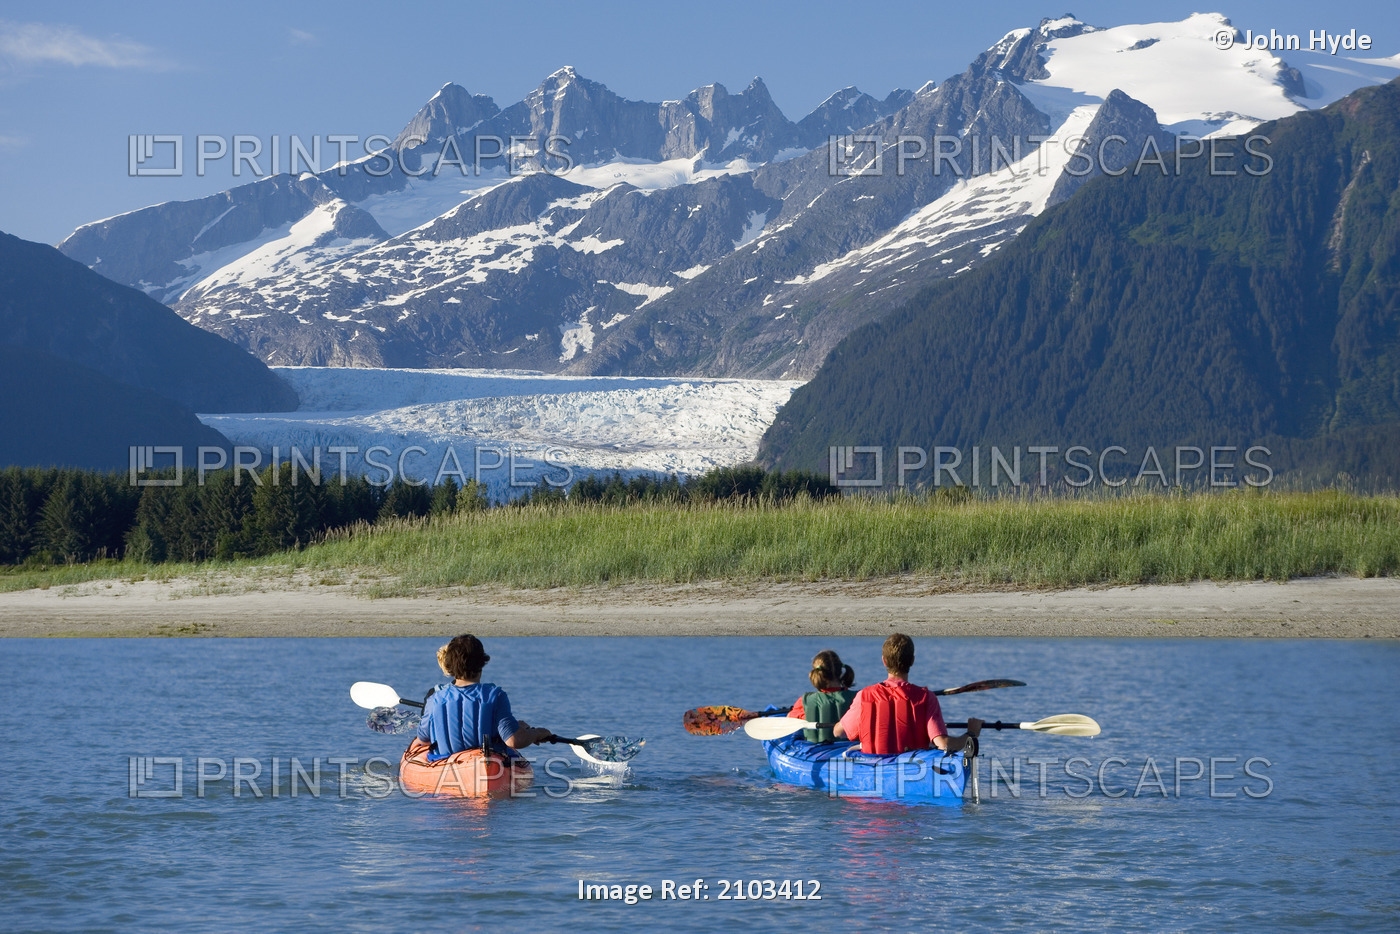 Kayakers Kayaking In Double Sea-Kayaks Near Juneau In Inside Passage With View ...